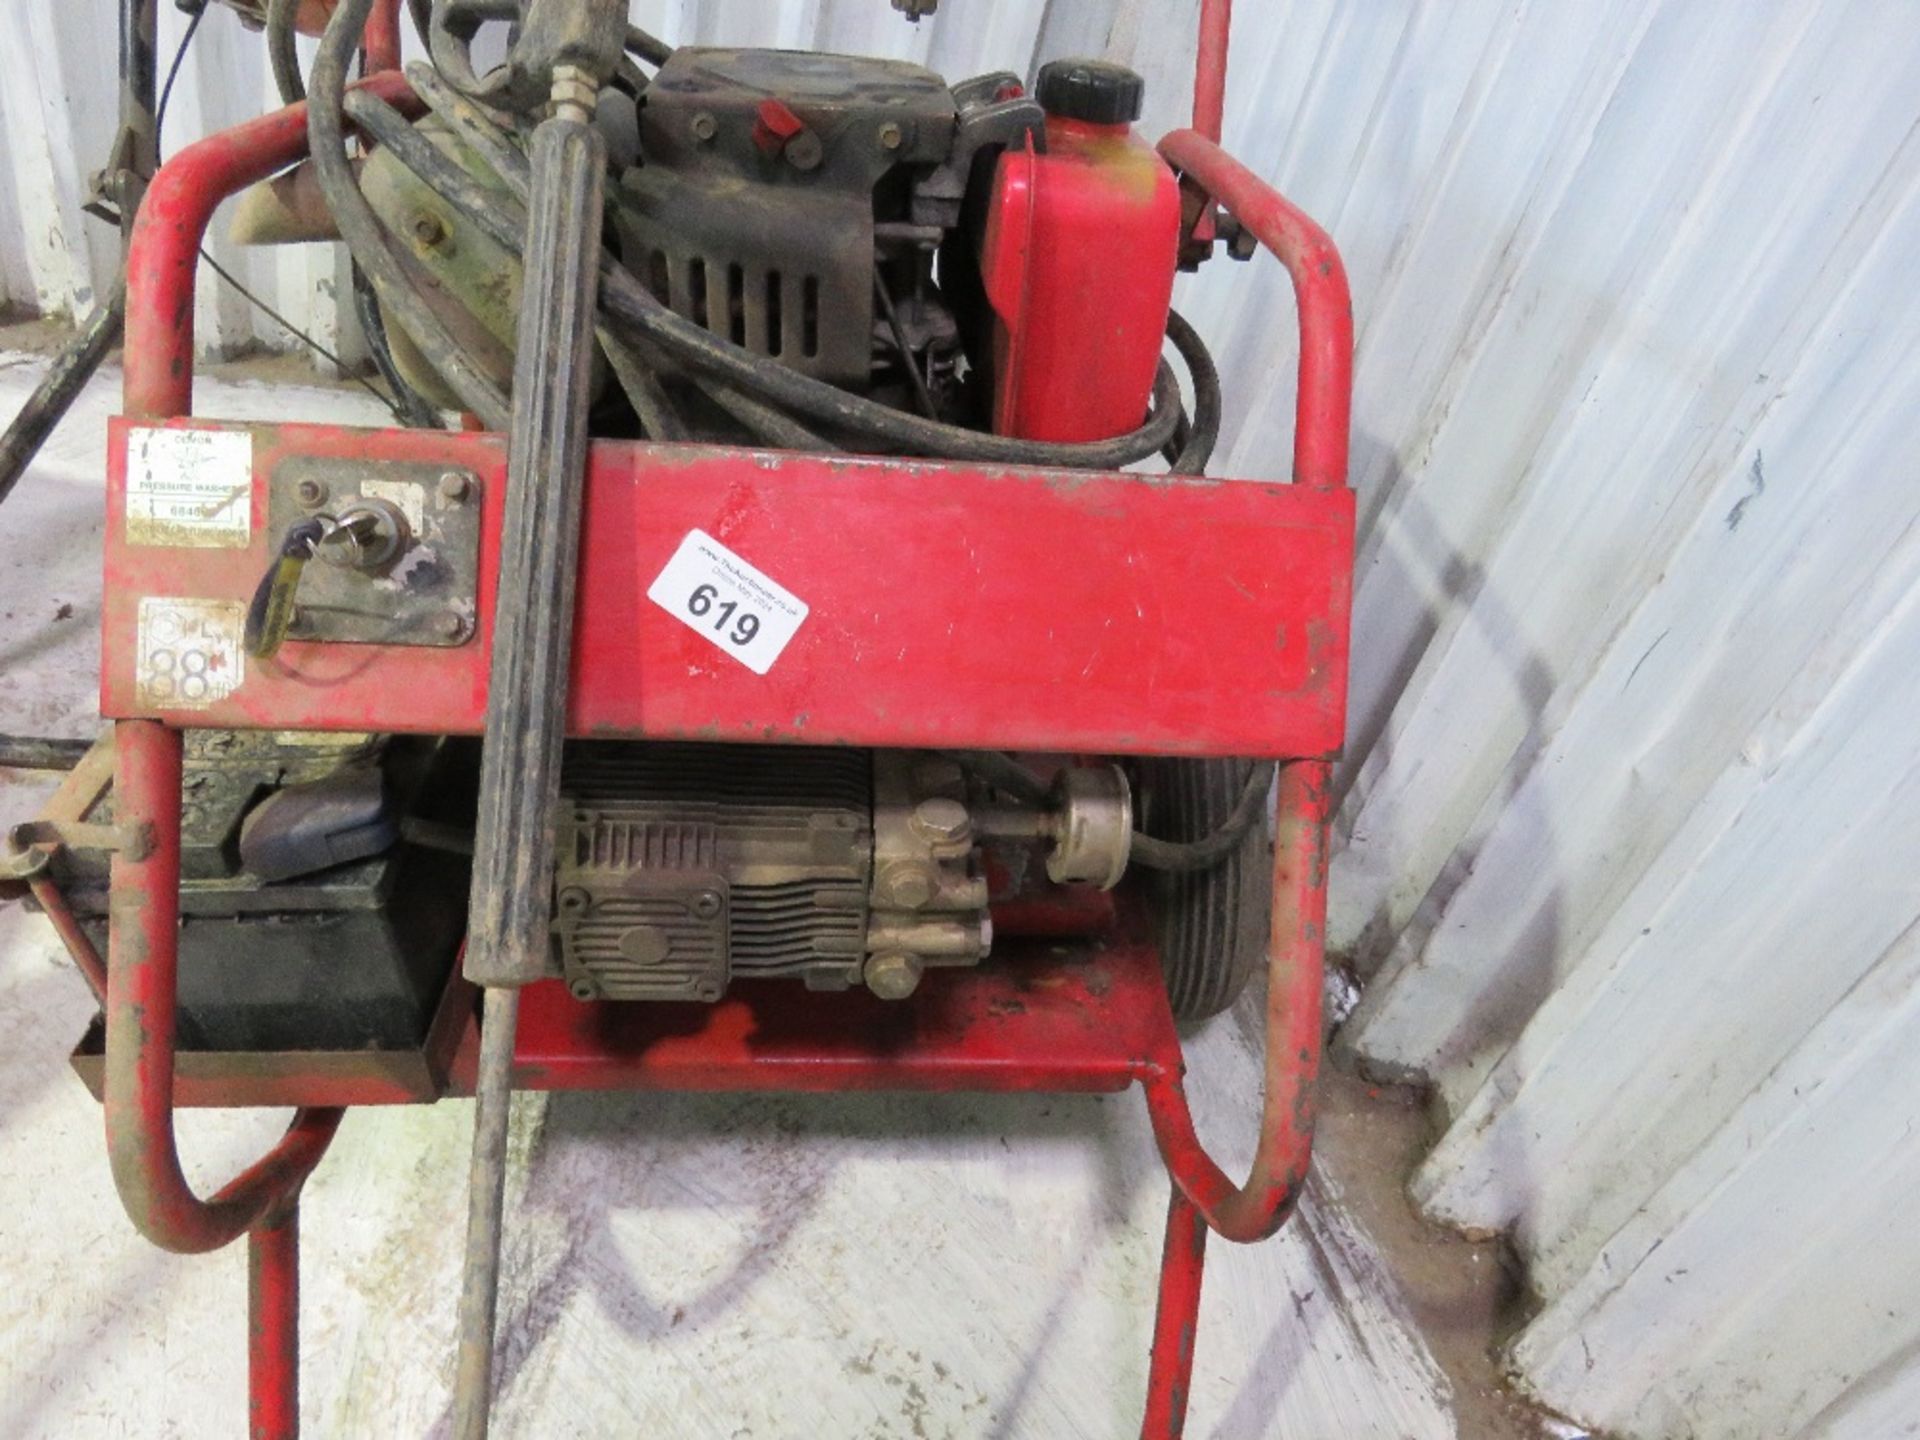 YANMAR DIESEL ENGINED PRESSURE WASHER. WHEN TESTED WAS SEEN TO START AND RUN (FUEL LOW) - Image 3 of 10